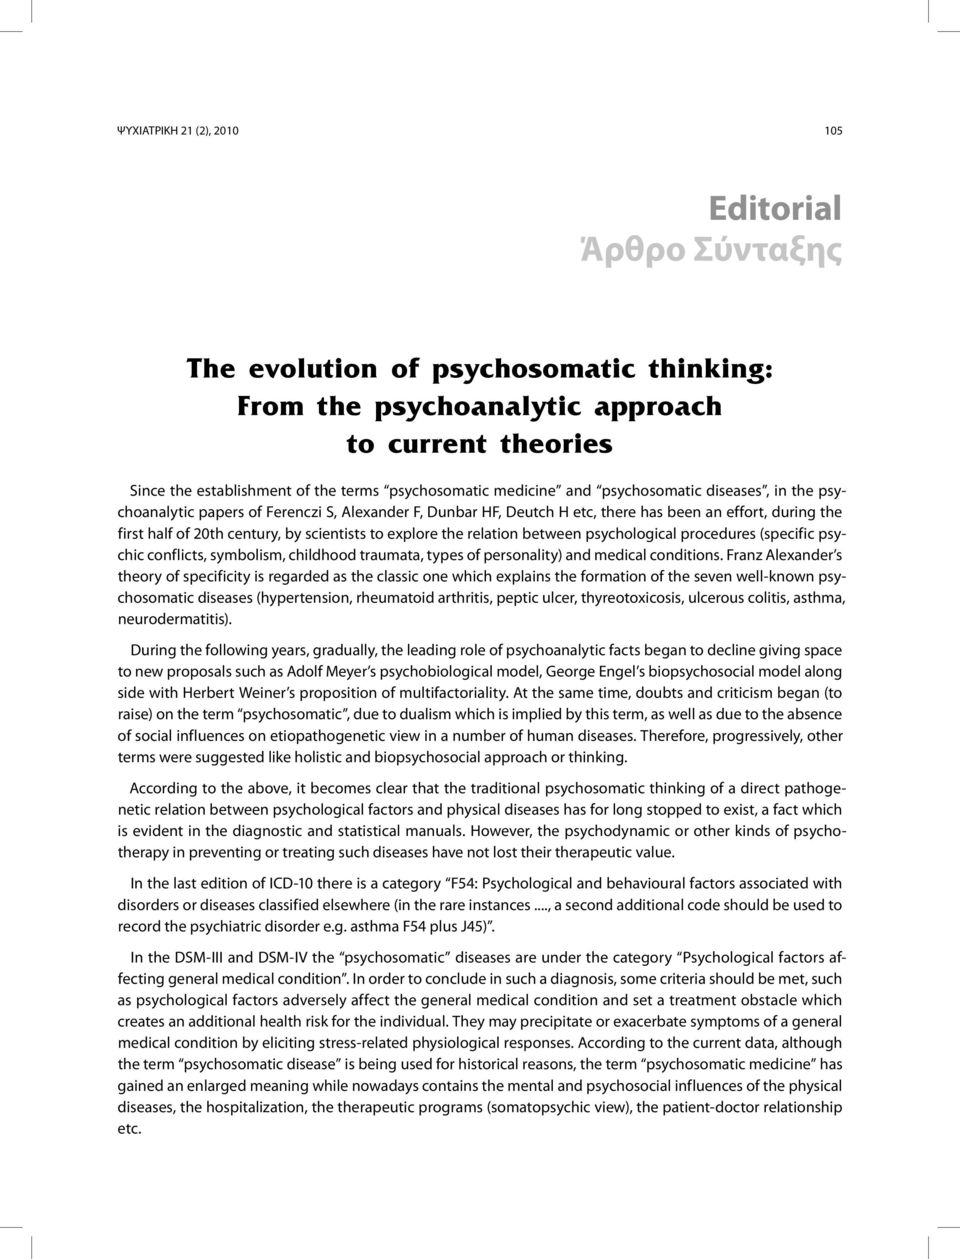 relation between psychological procedures (specific psychic conflicts, symbolism, childhood traumata, types of personality) and medical conditions.